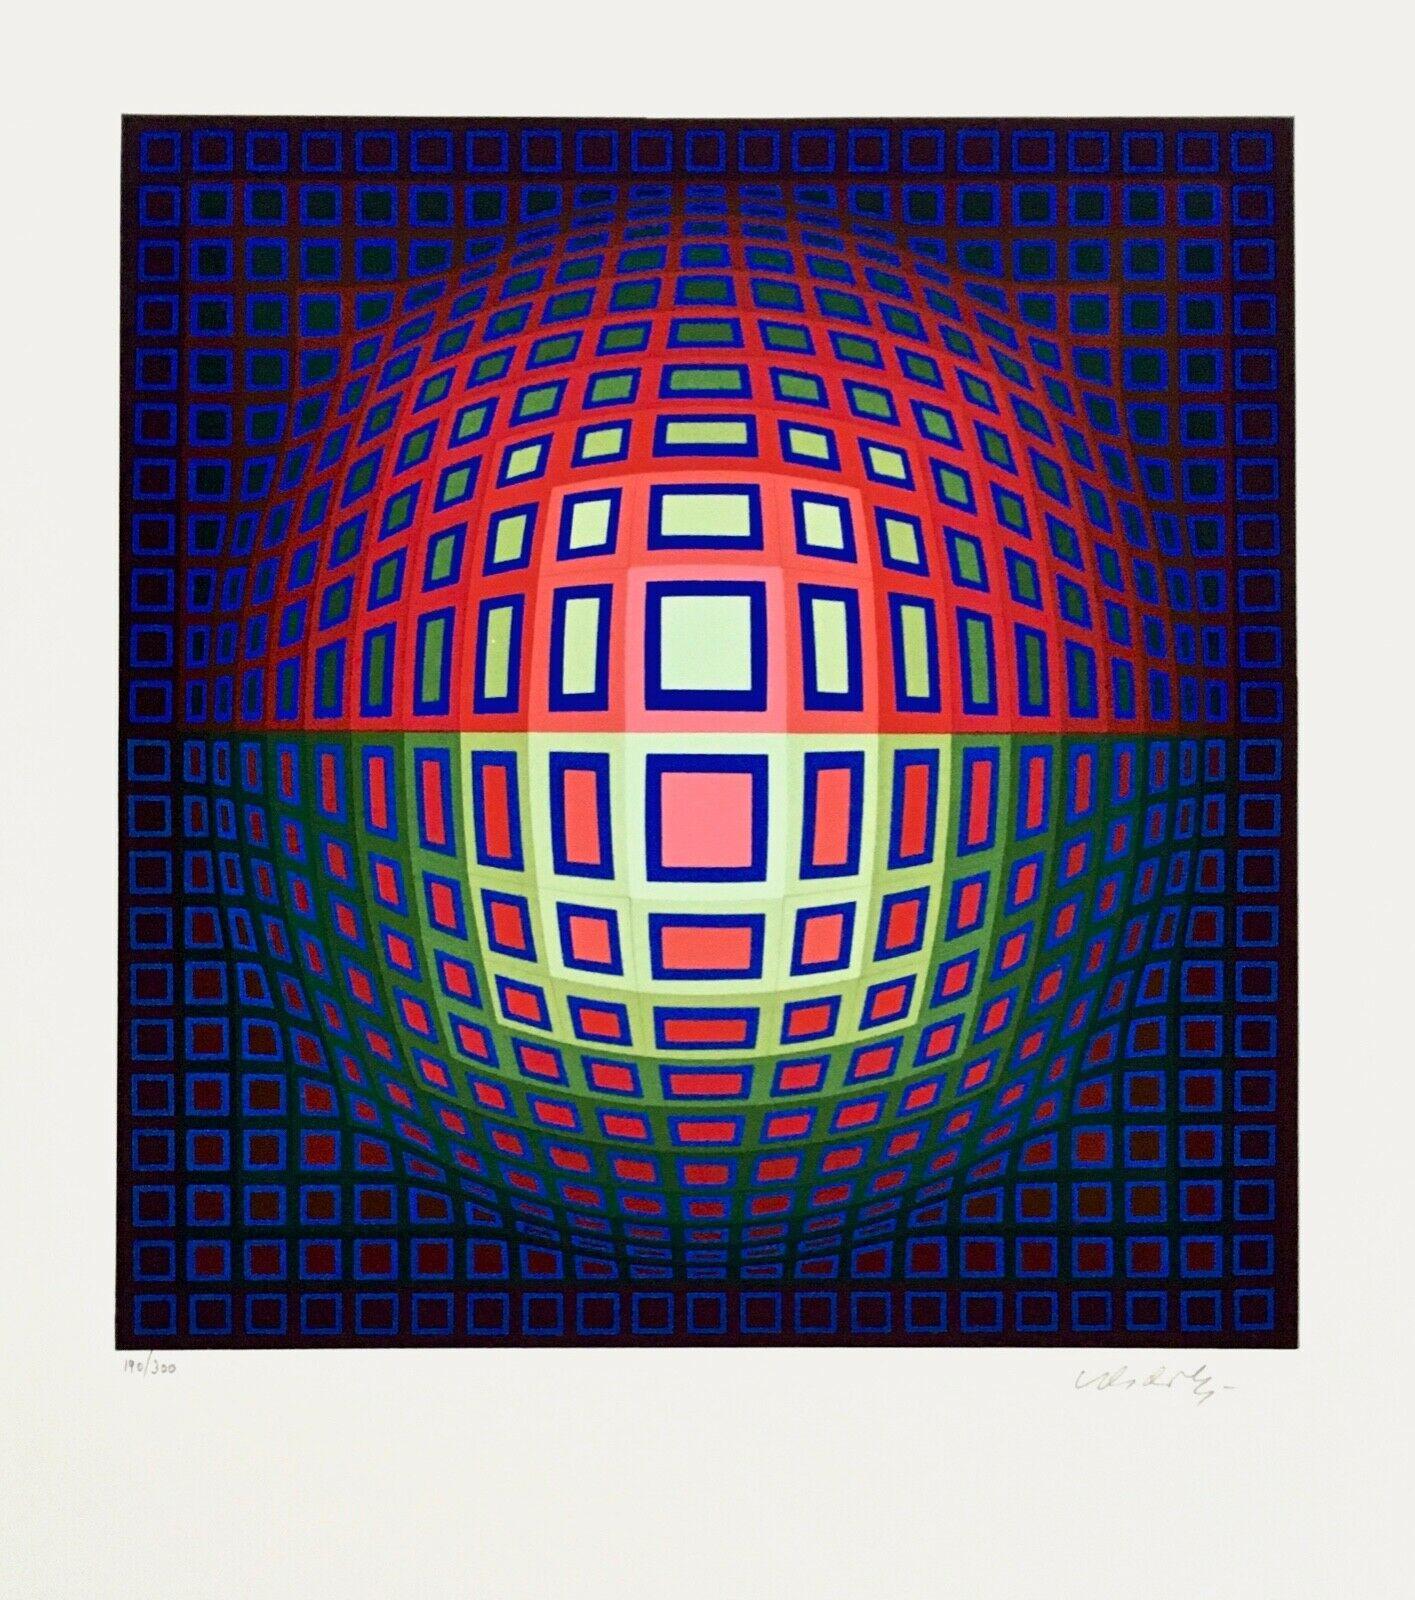 Artist: Victor Vasarely (1908-1997)
Title: Vega Blue
Year: Circa 1982
Medium: Silkscreen on Arches paper
Edition: 190/300, plus proofs
Size: 30 x 22 inches
Condition: Good
Inscription: Signed and numbered by the artist.
Notes:  Published by Atelier